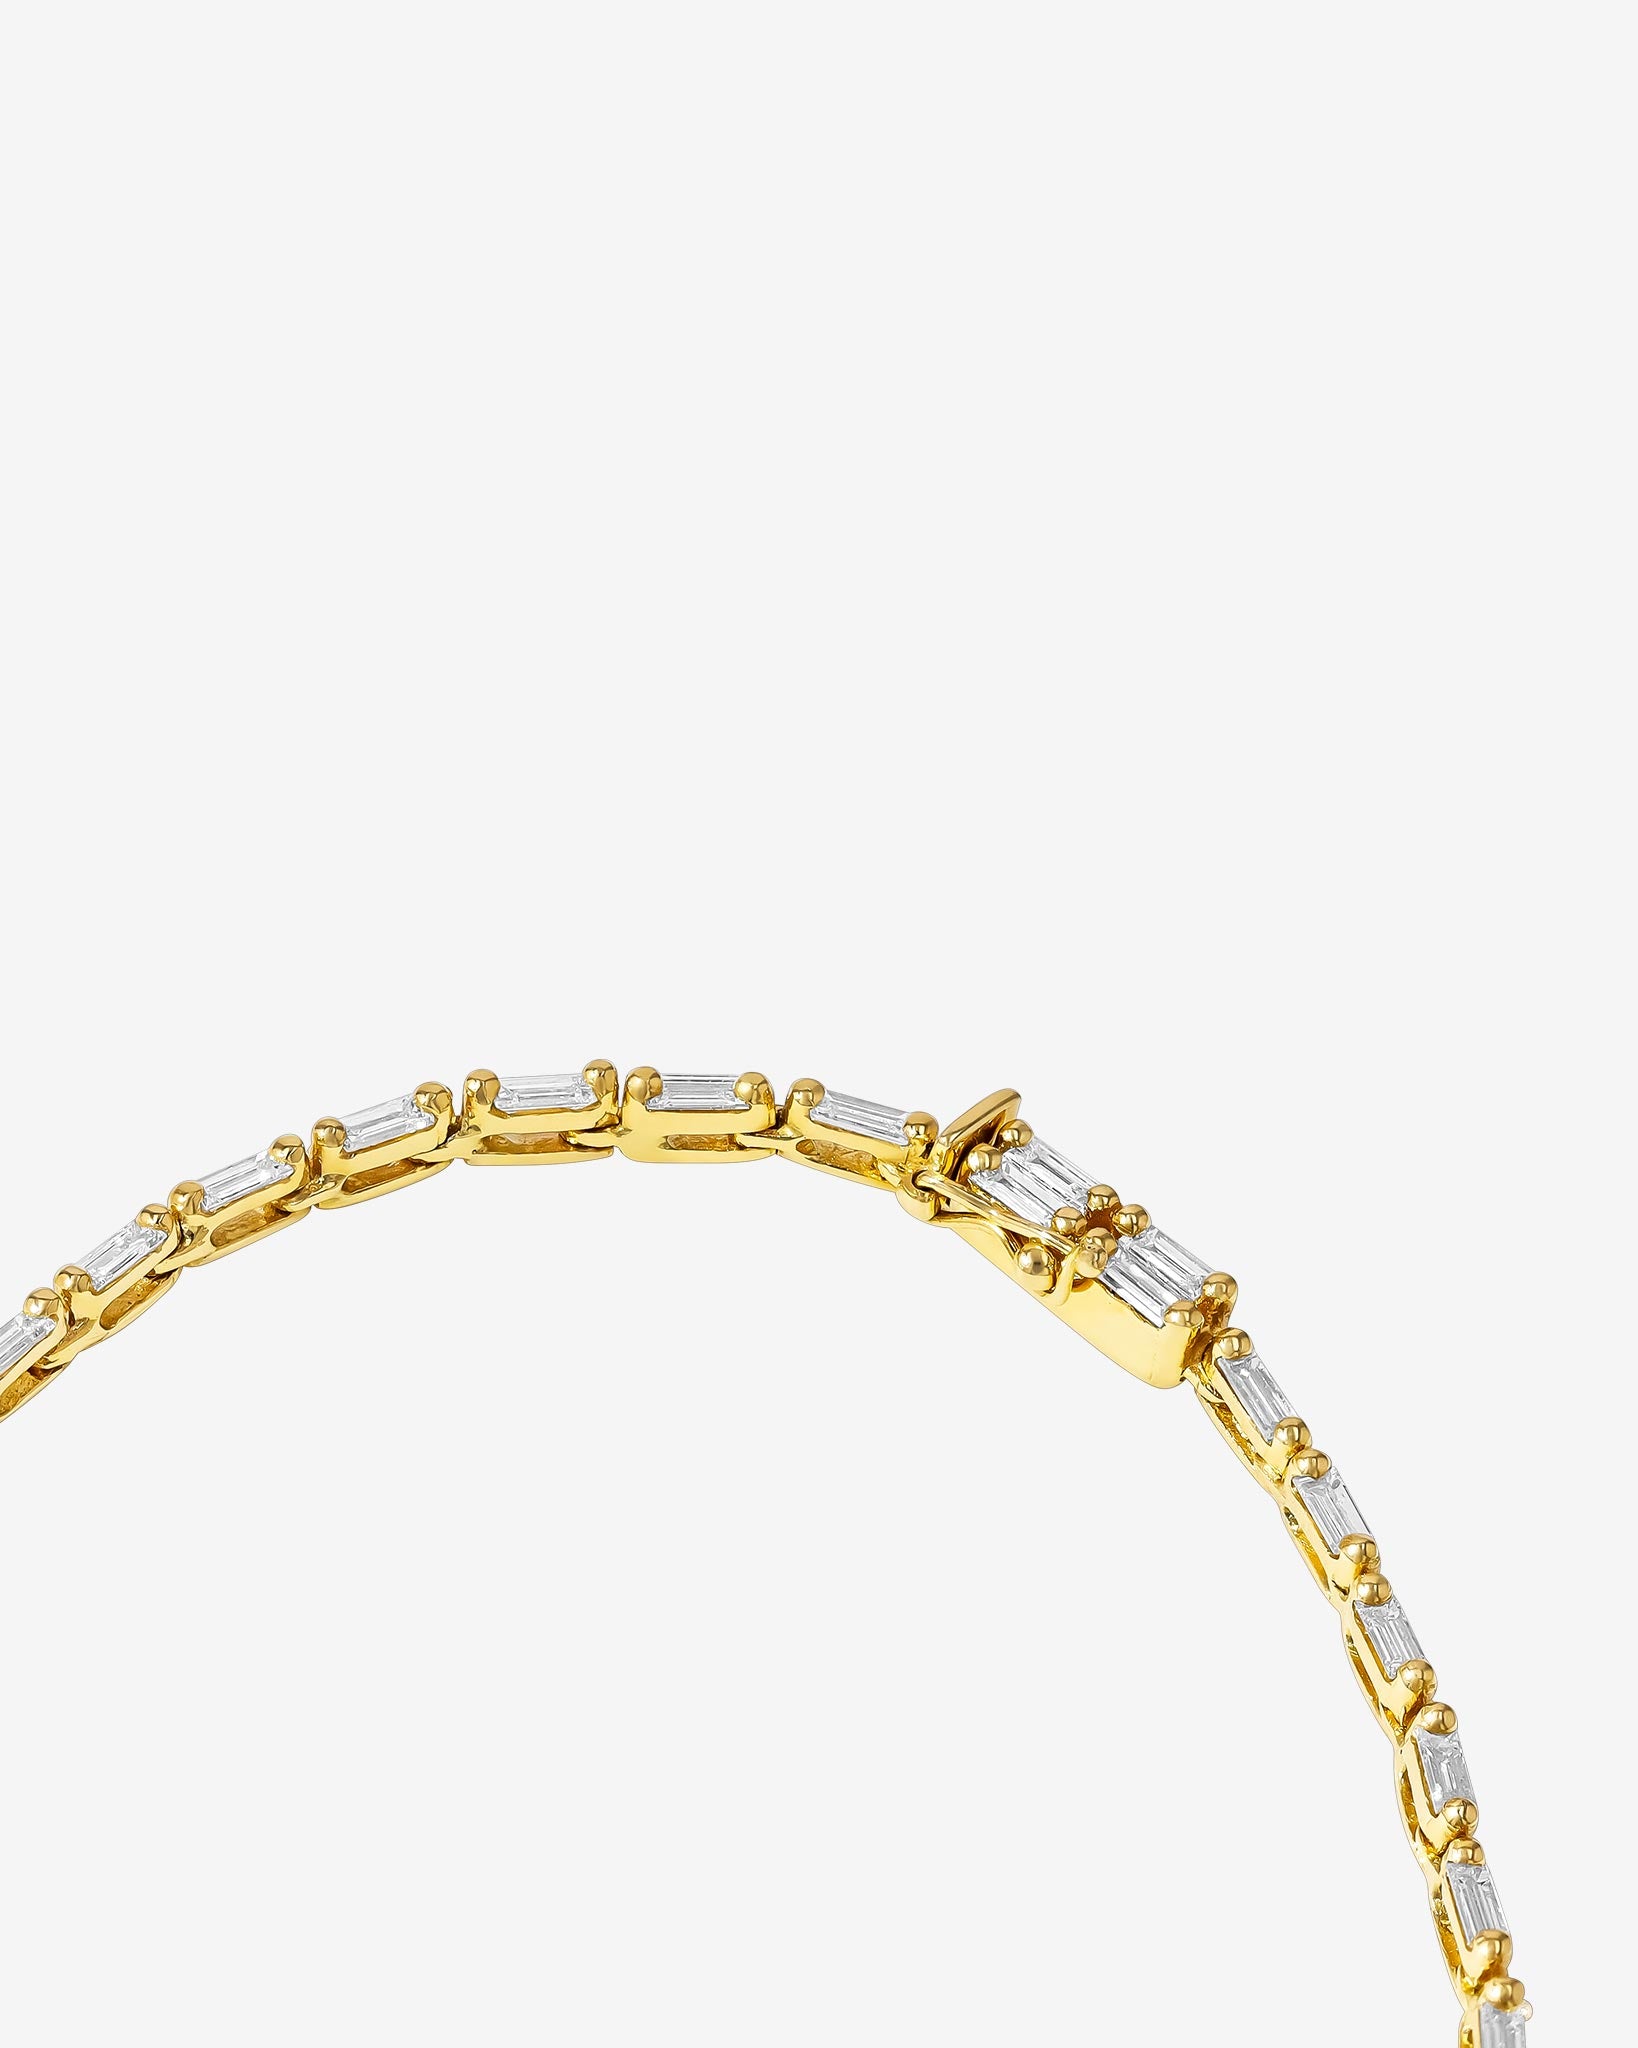 Suzanne Kalan Linear Full Diamond Tennis Necklace in 18k yellow gold